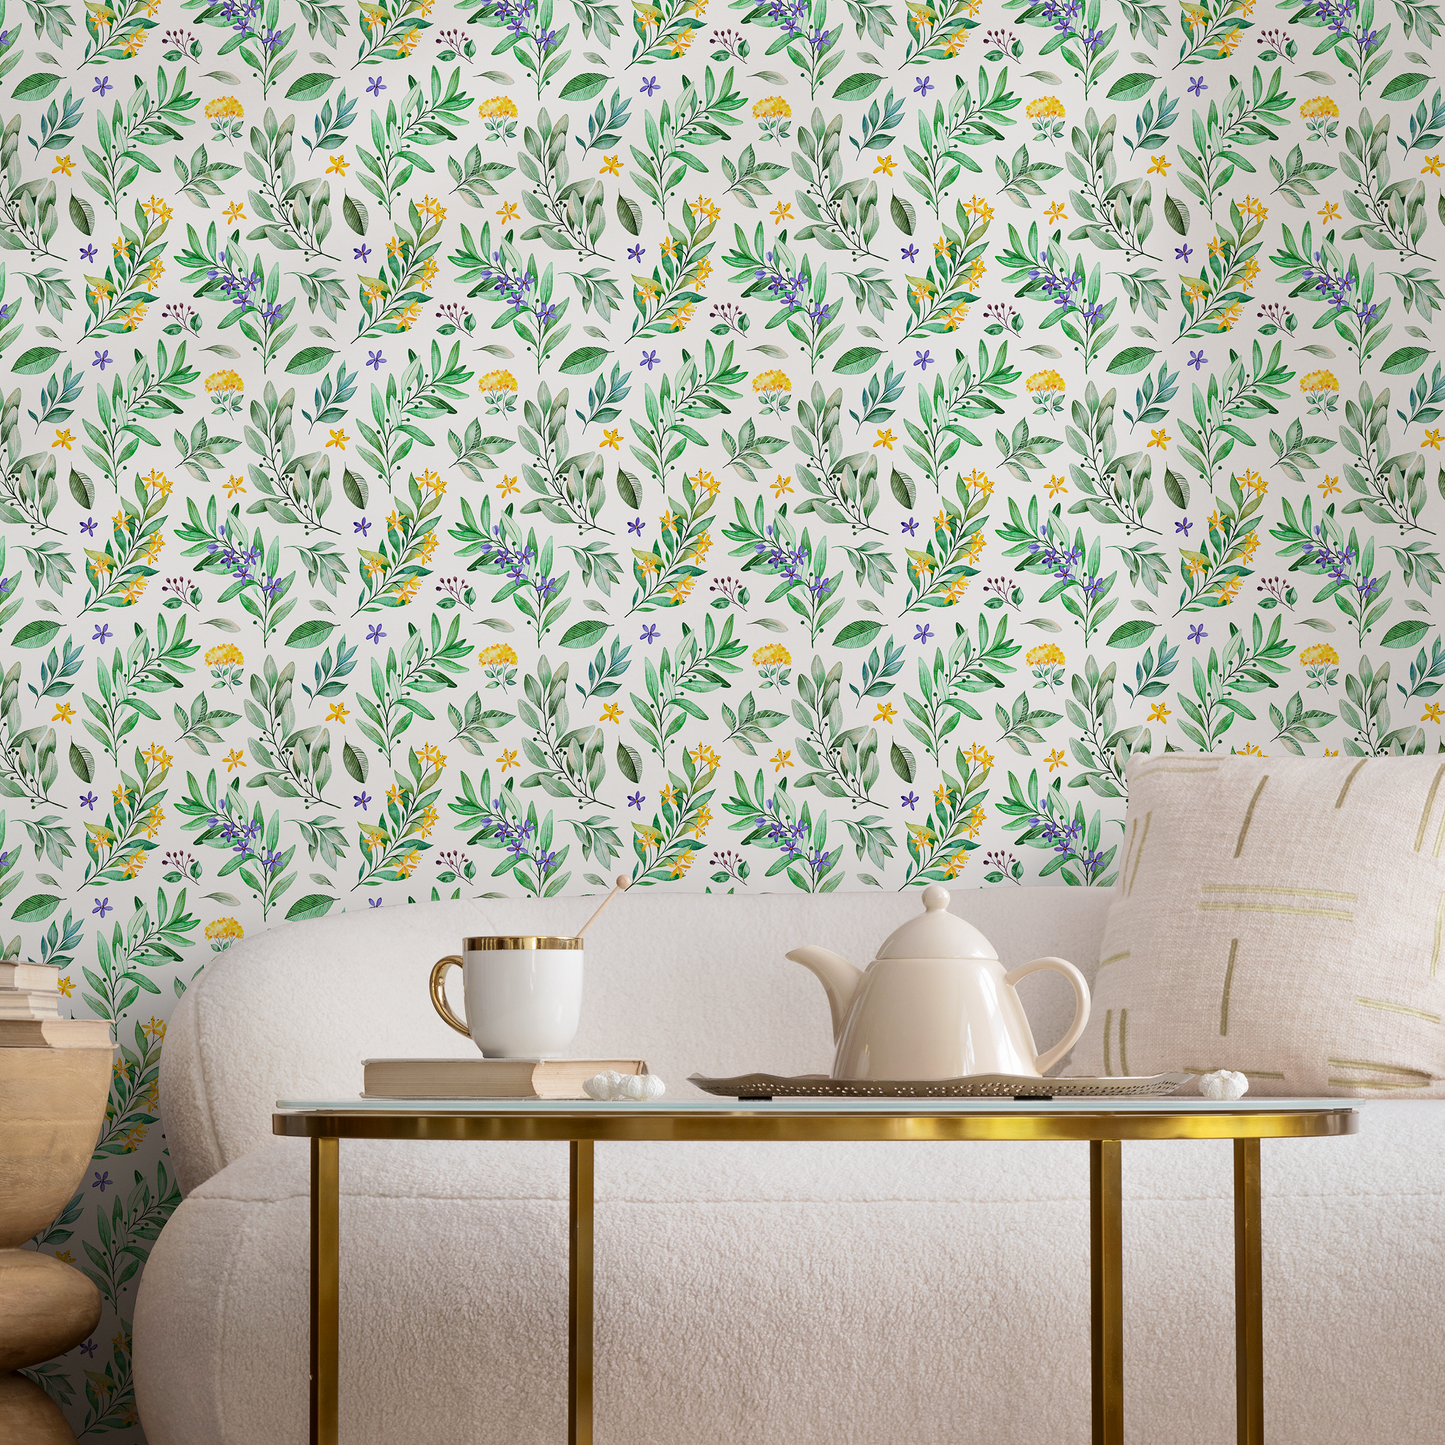 Removable Wallpaper Peel and Stick Wallpaper Wall Paper Wall Mural Temporary Wallpaper Wall Mural - A708